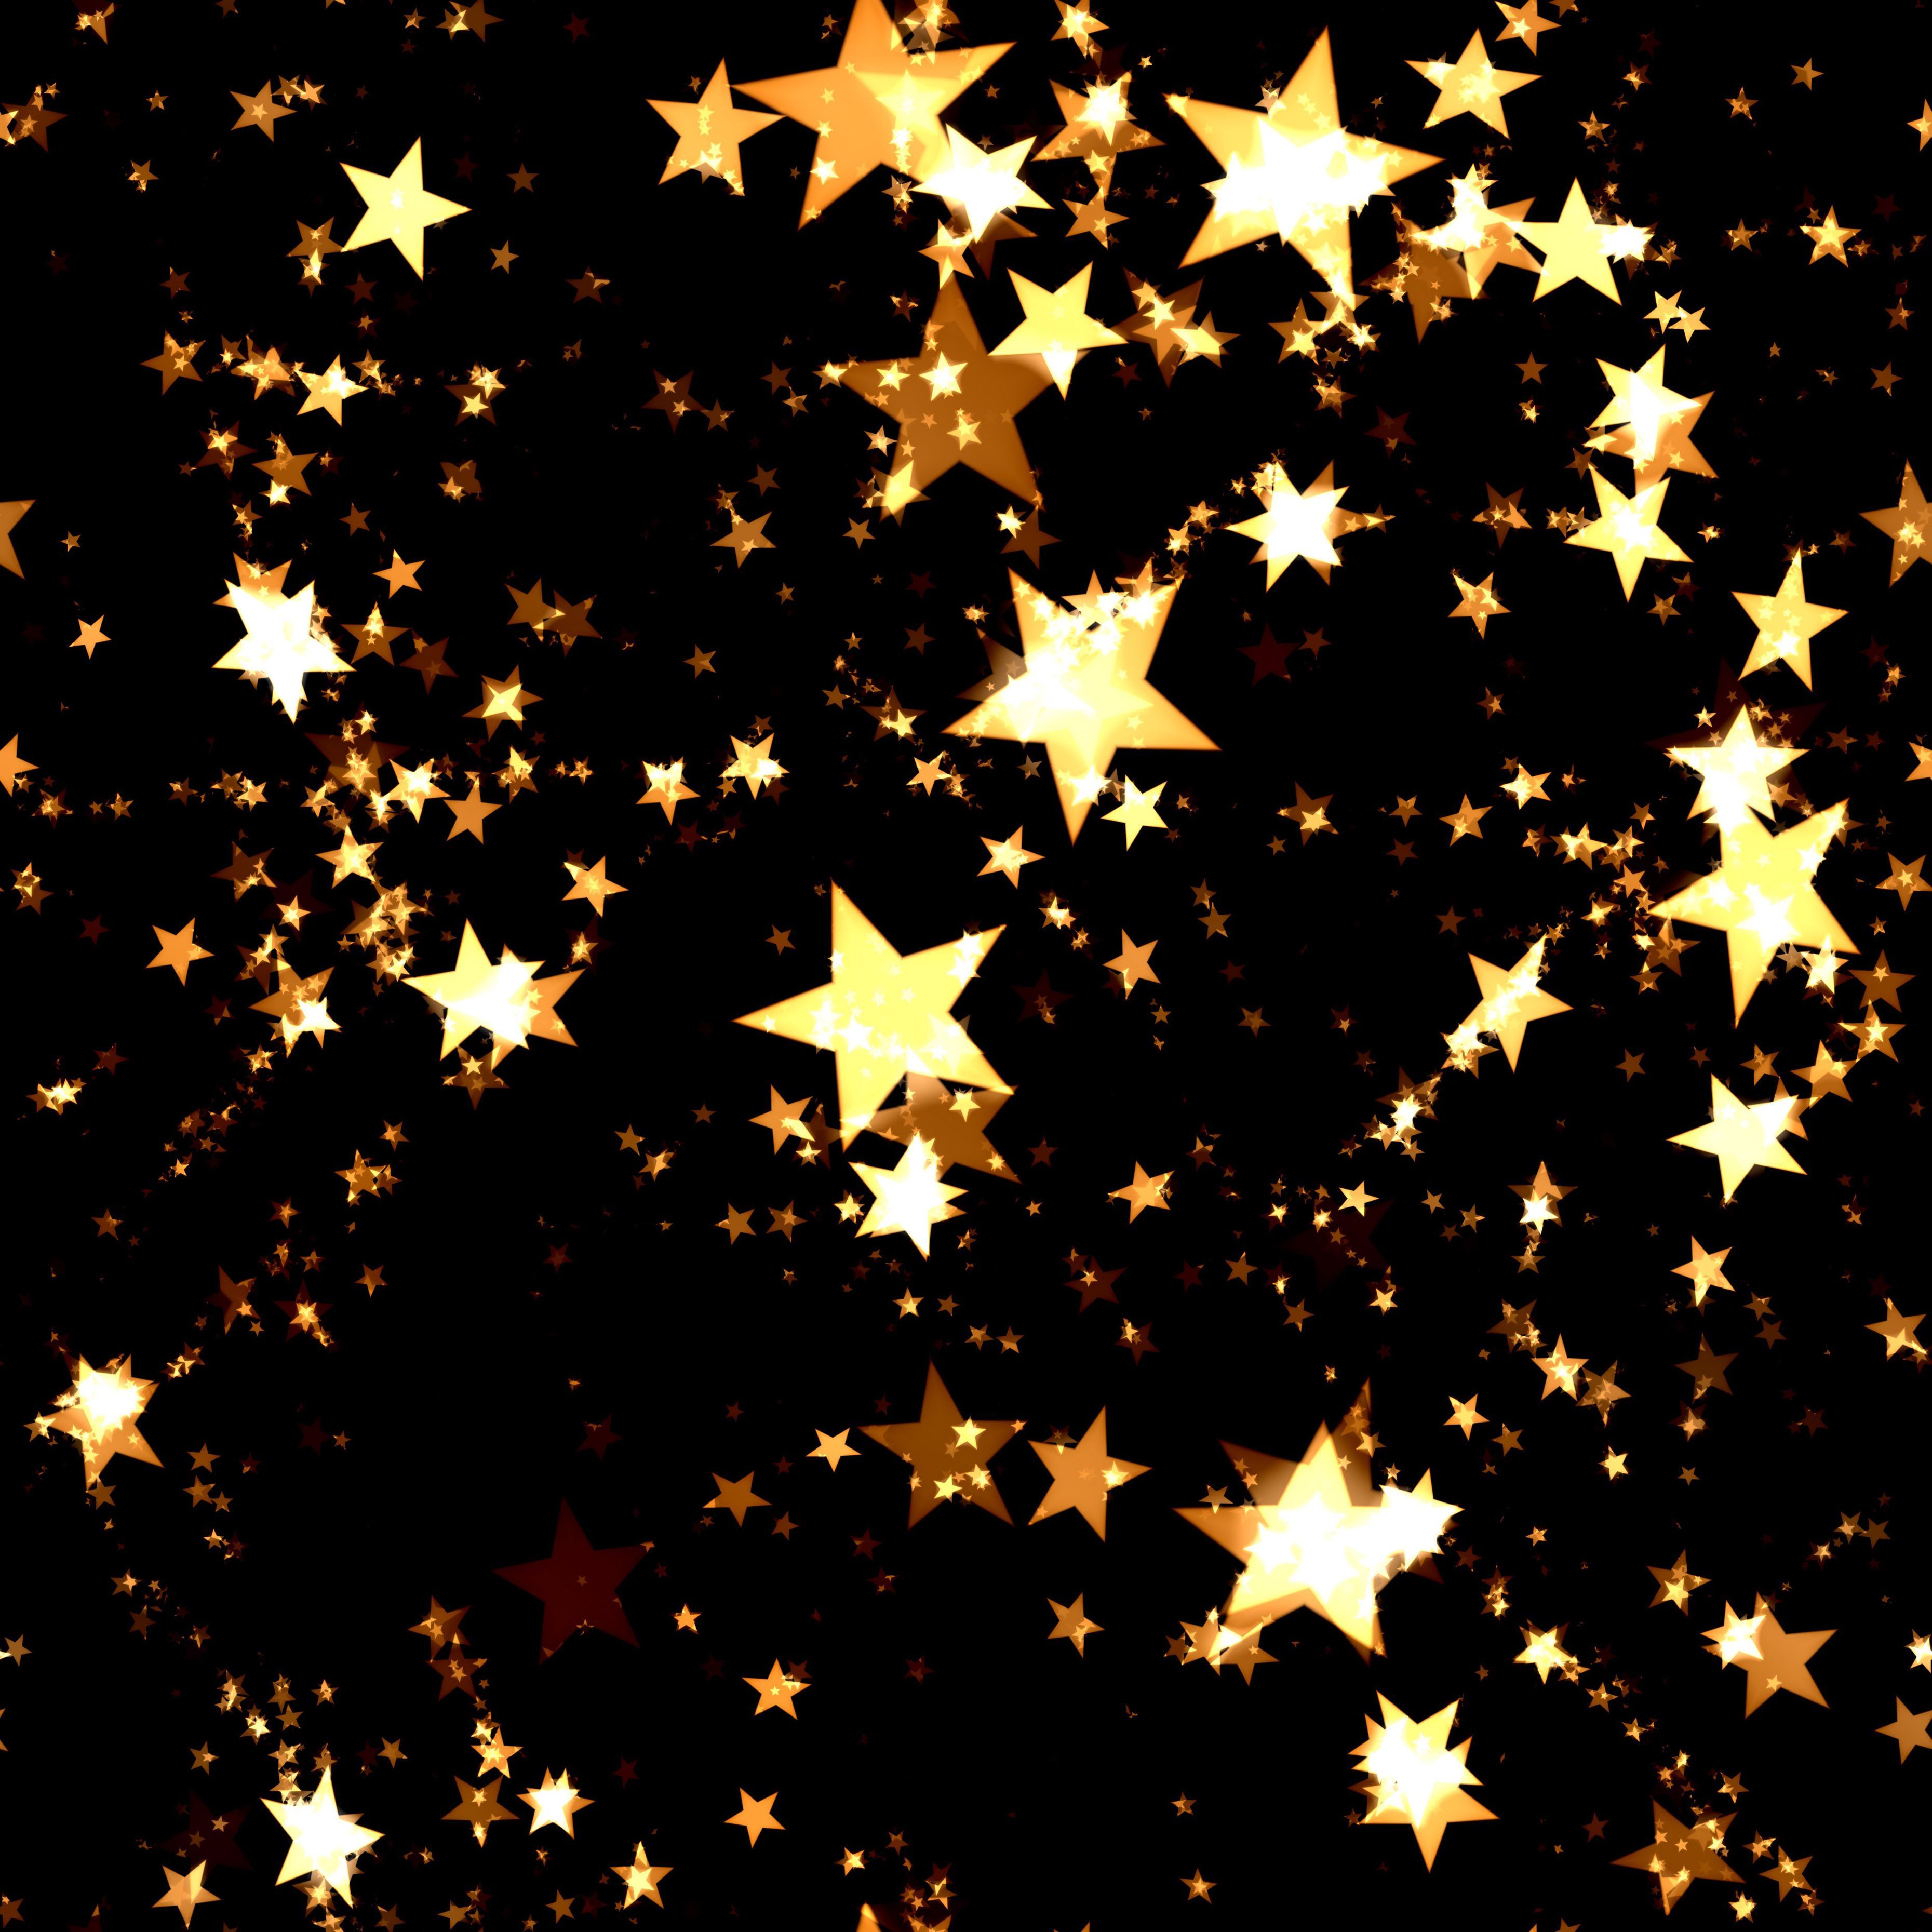 35 Stars at Xmas Background Images, Cards or Christmas Wallpapers